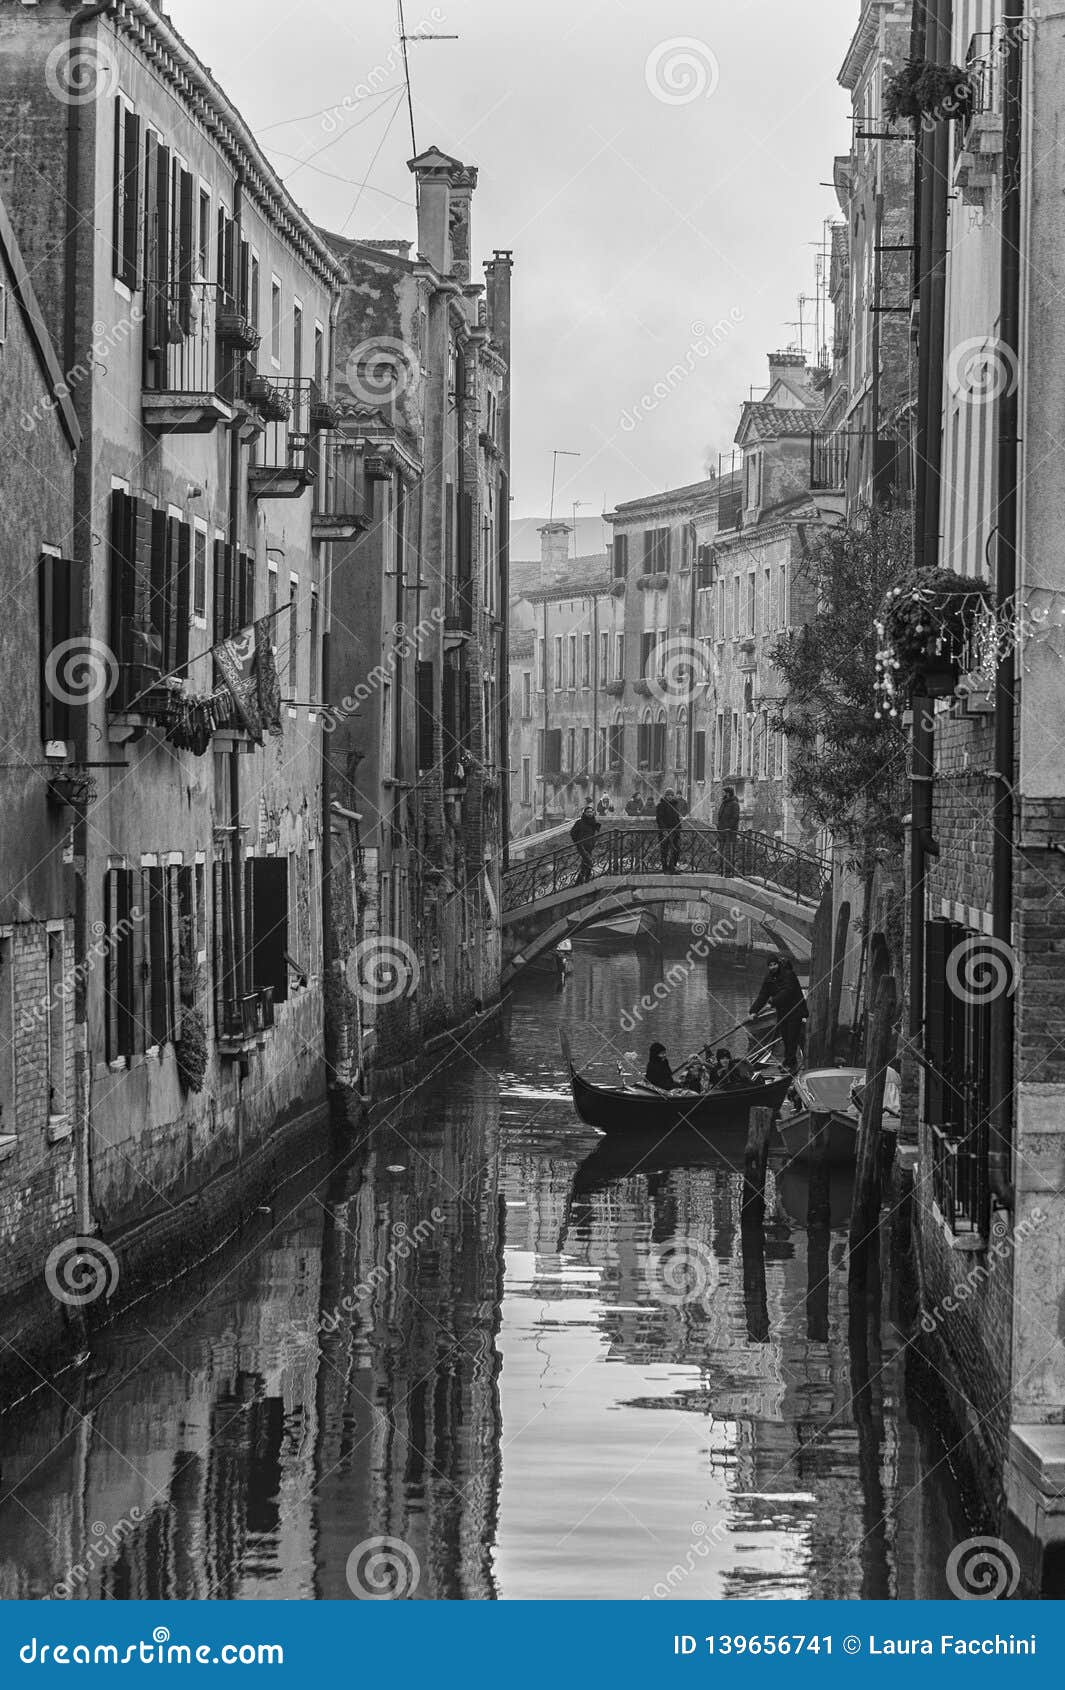 Typical Picturesque Romantic Venetian Canal in Black and White - Venice ...